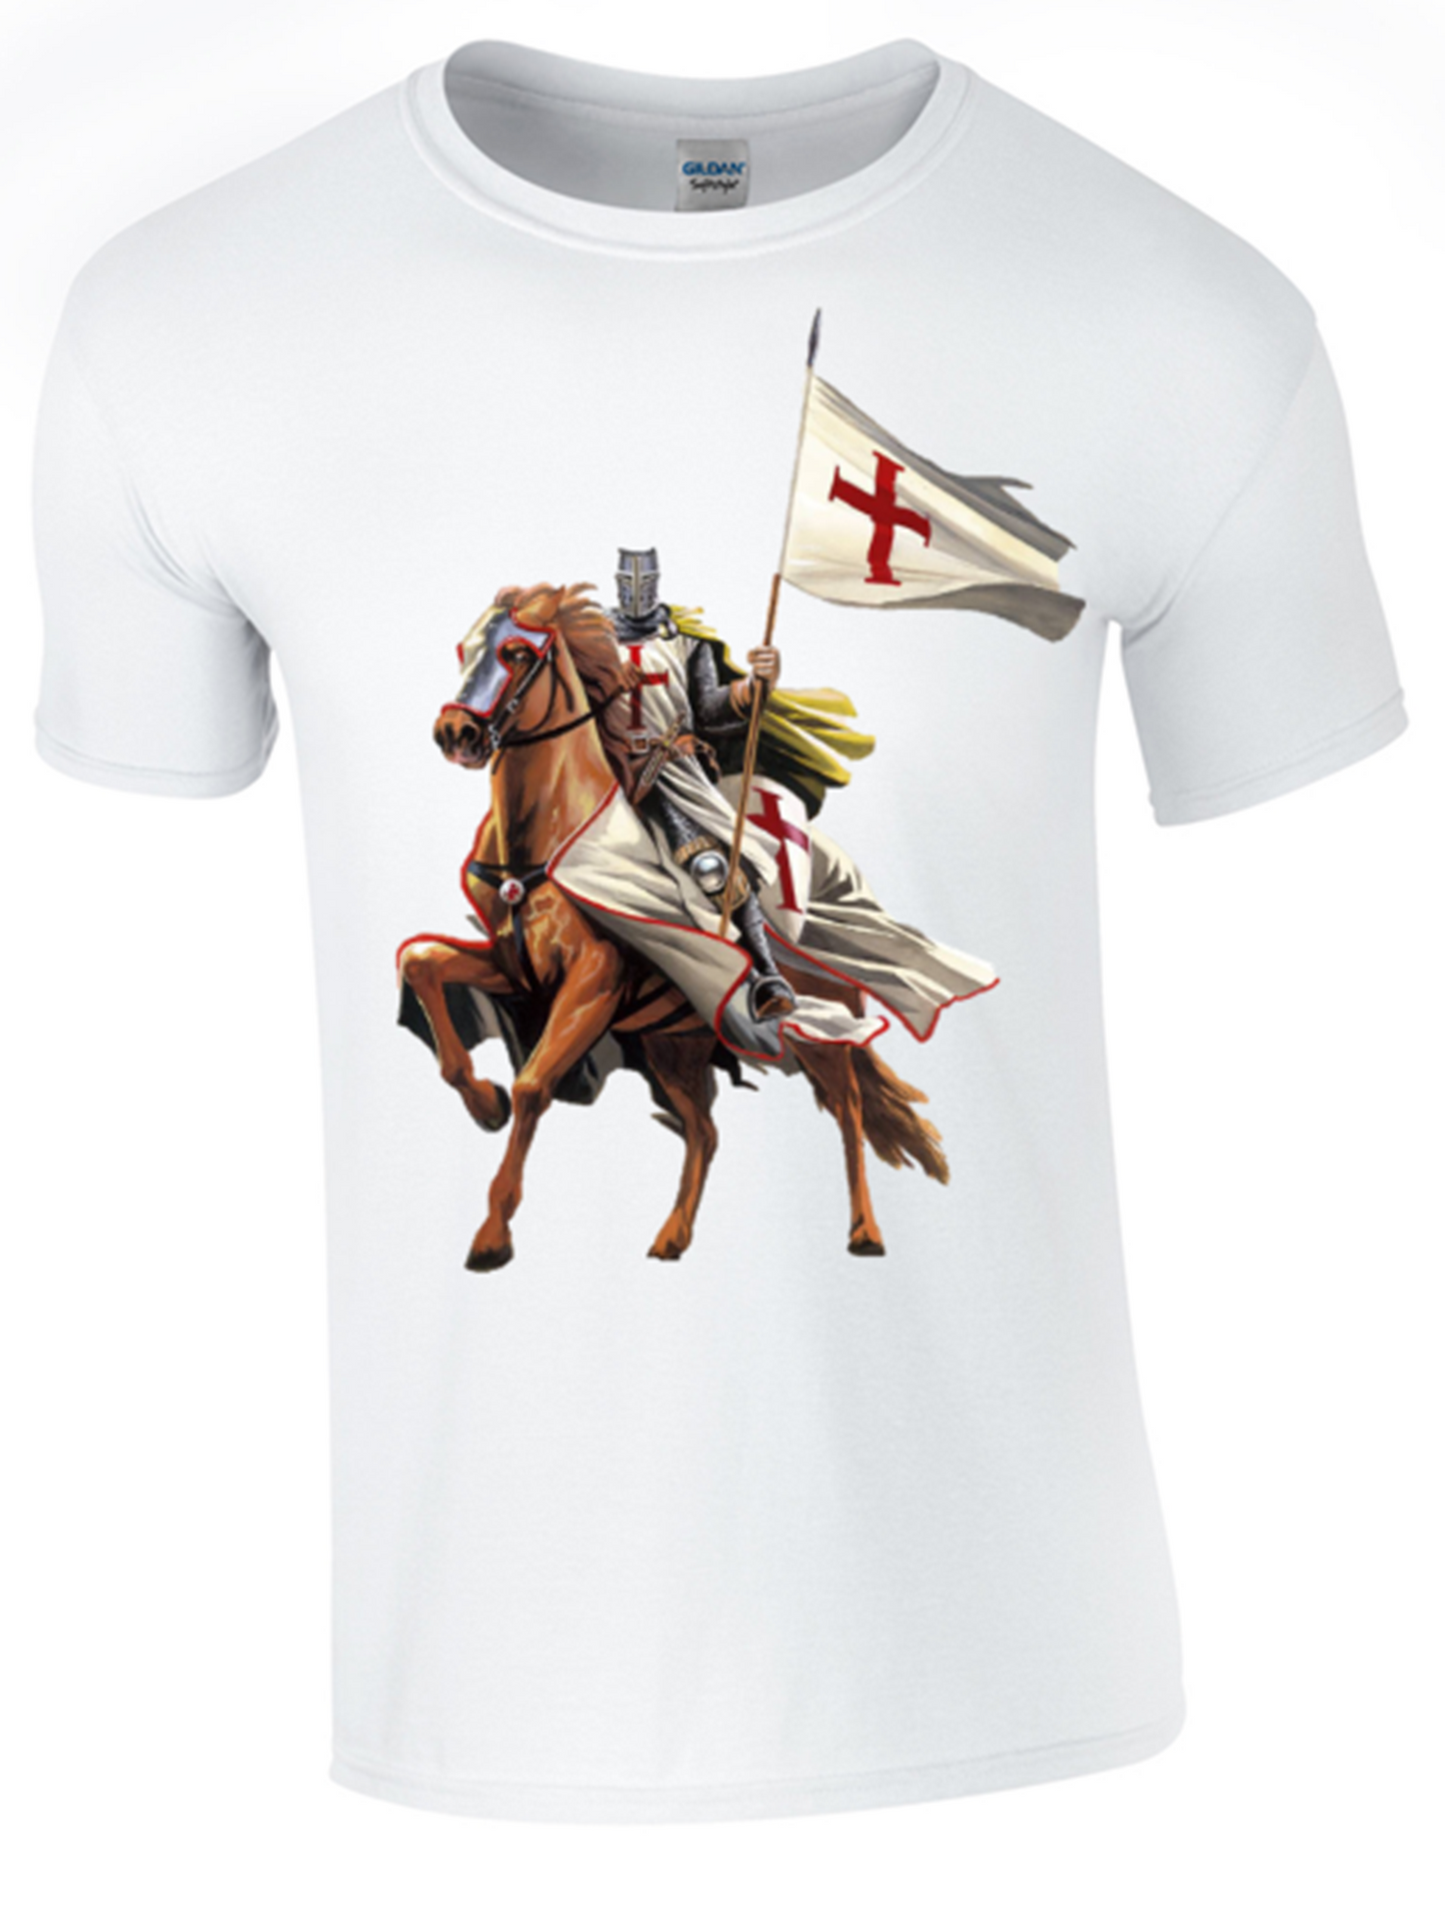 St George's Day - on Horseback - T-Shirt Printed DTG (Direct to Garment) for a Permanent Finish. - Army 1157 kit S / White Army 1157 Kit Veterans Owned Business